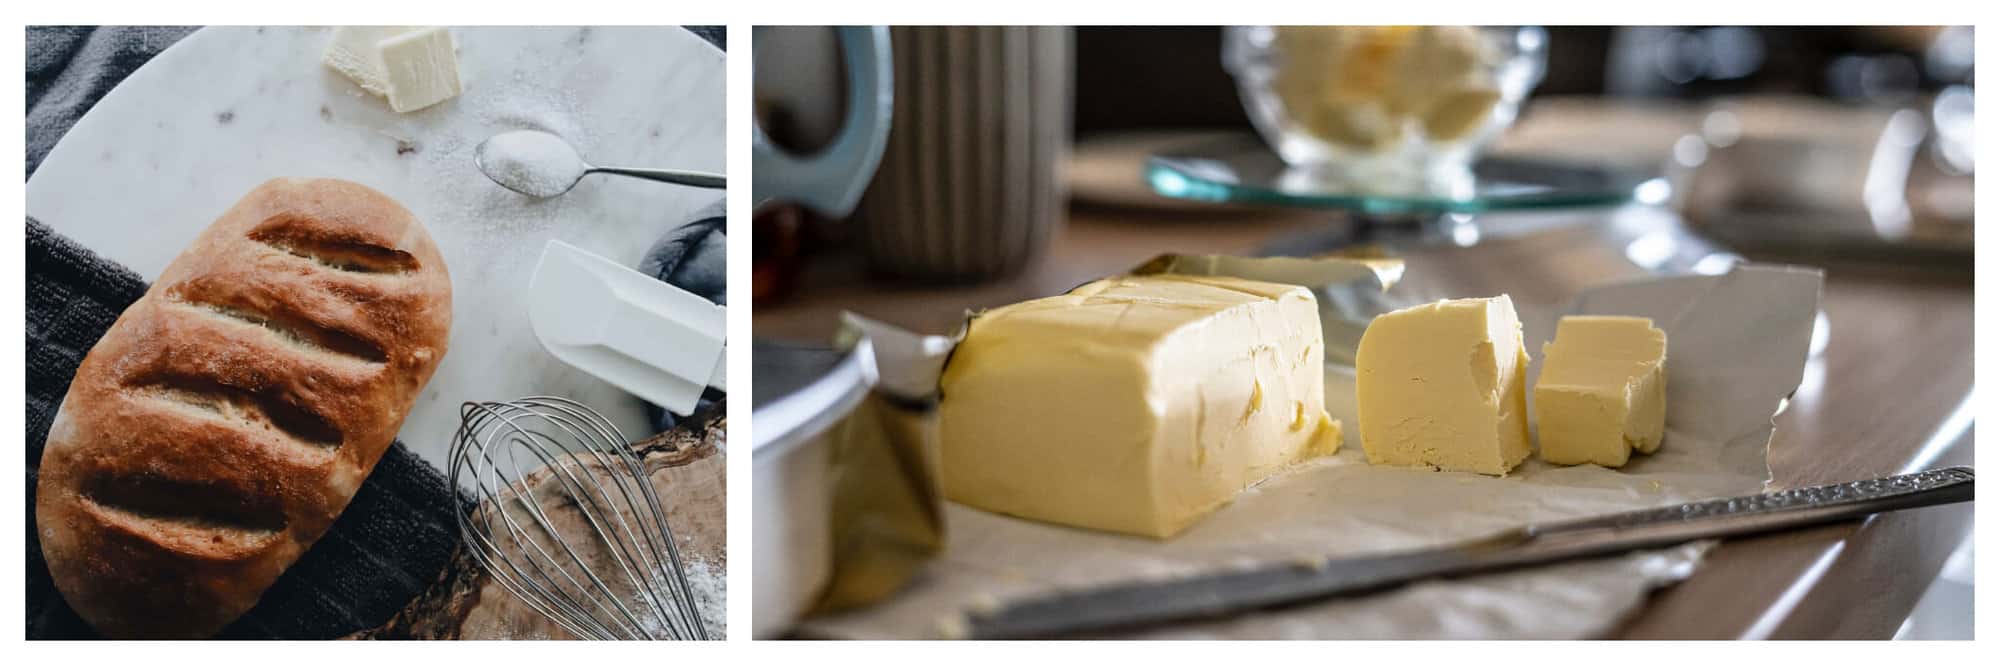 Left: A loaf of artisanal bread among other baking supplies including sugar, butter, a whisk and a spatula. Right: Butter cut into large squares resting on top of a table. 